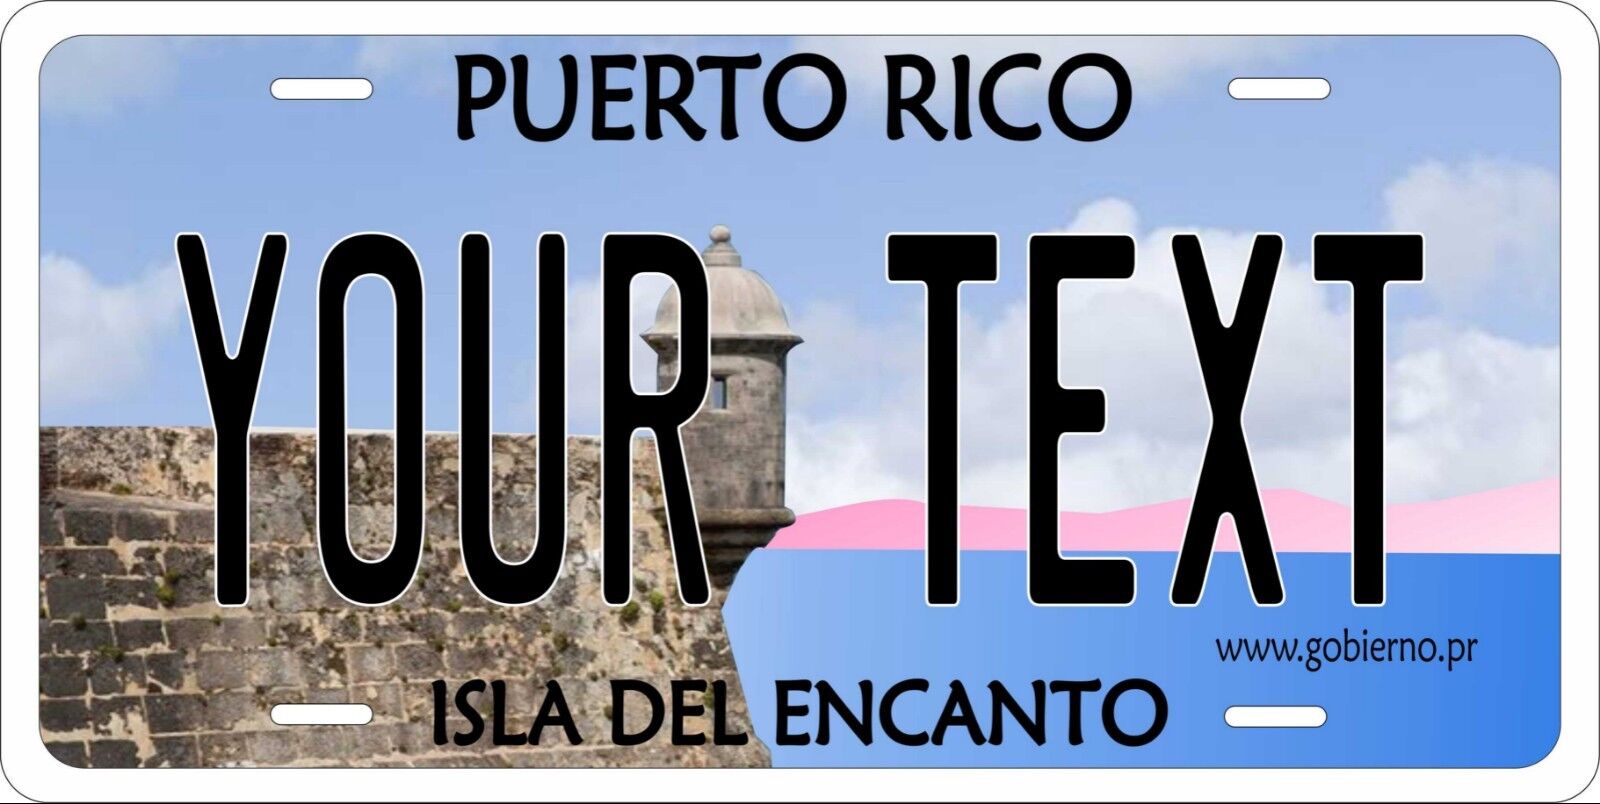 Puerto Rico 2007  License Plate Personalized Custom Car Bike Motorcycle Moped 